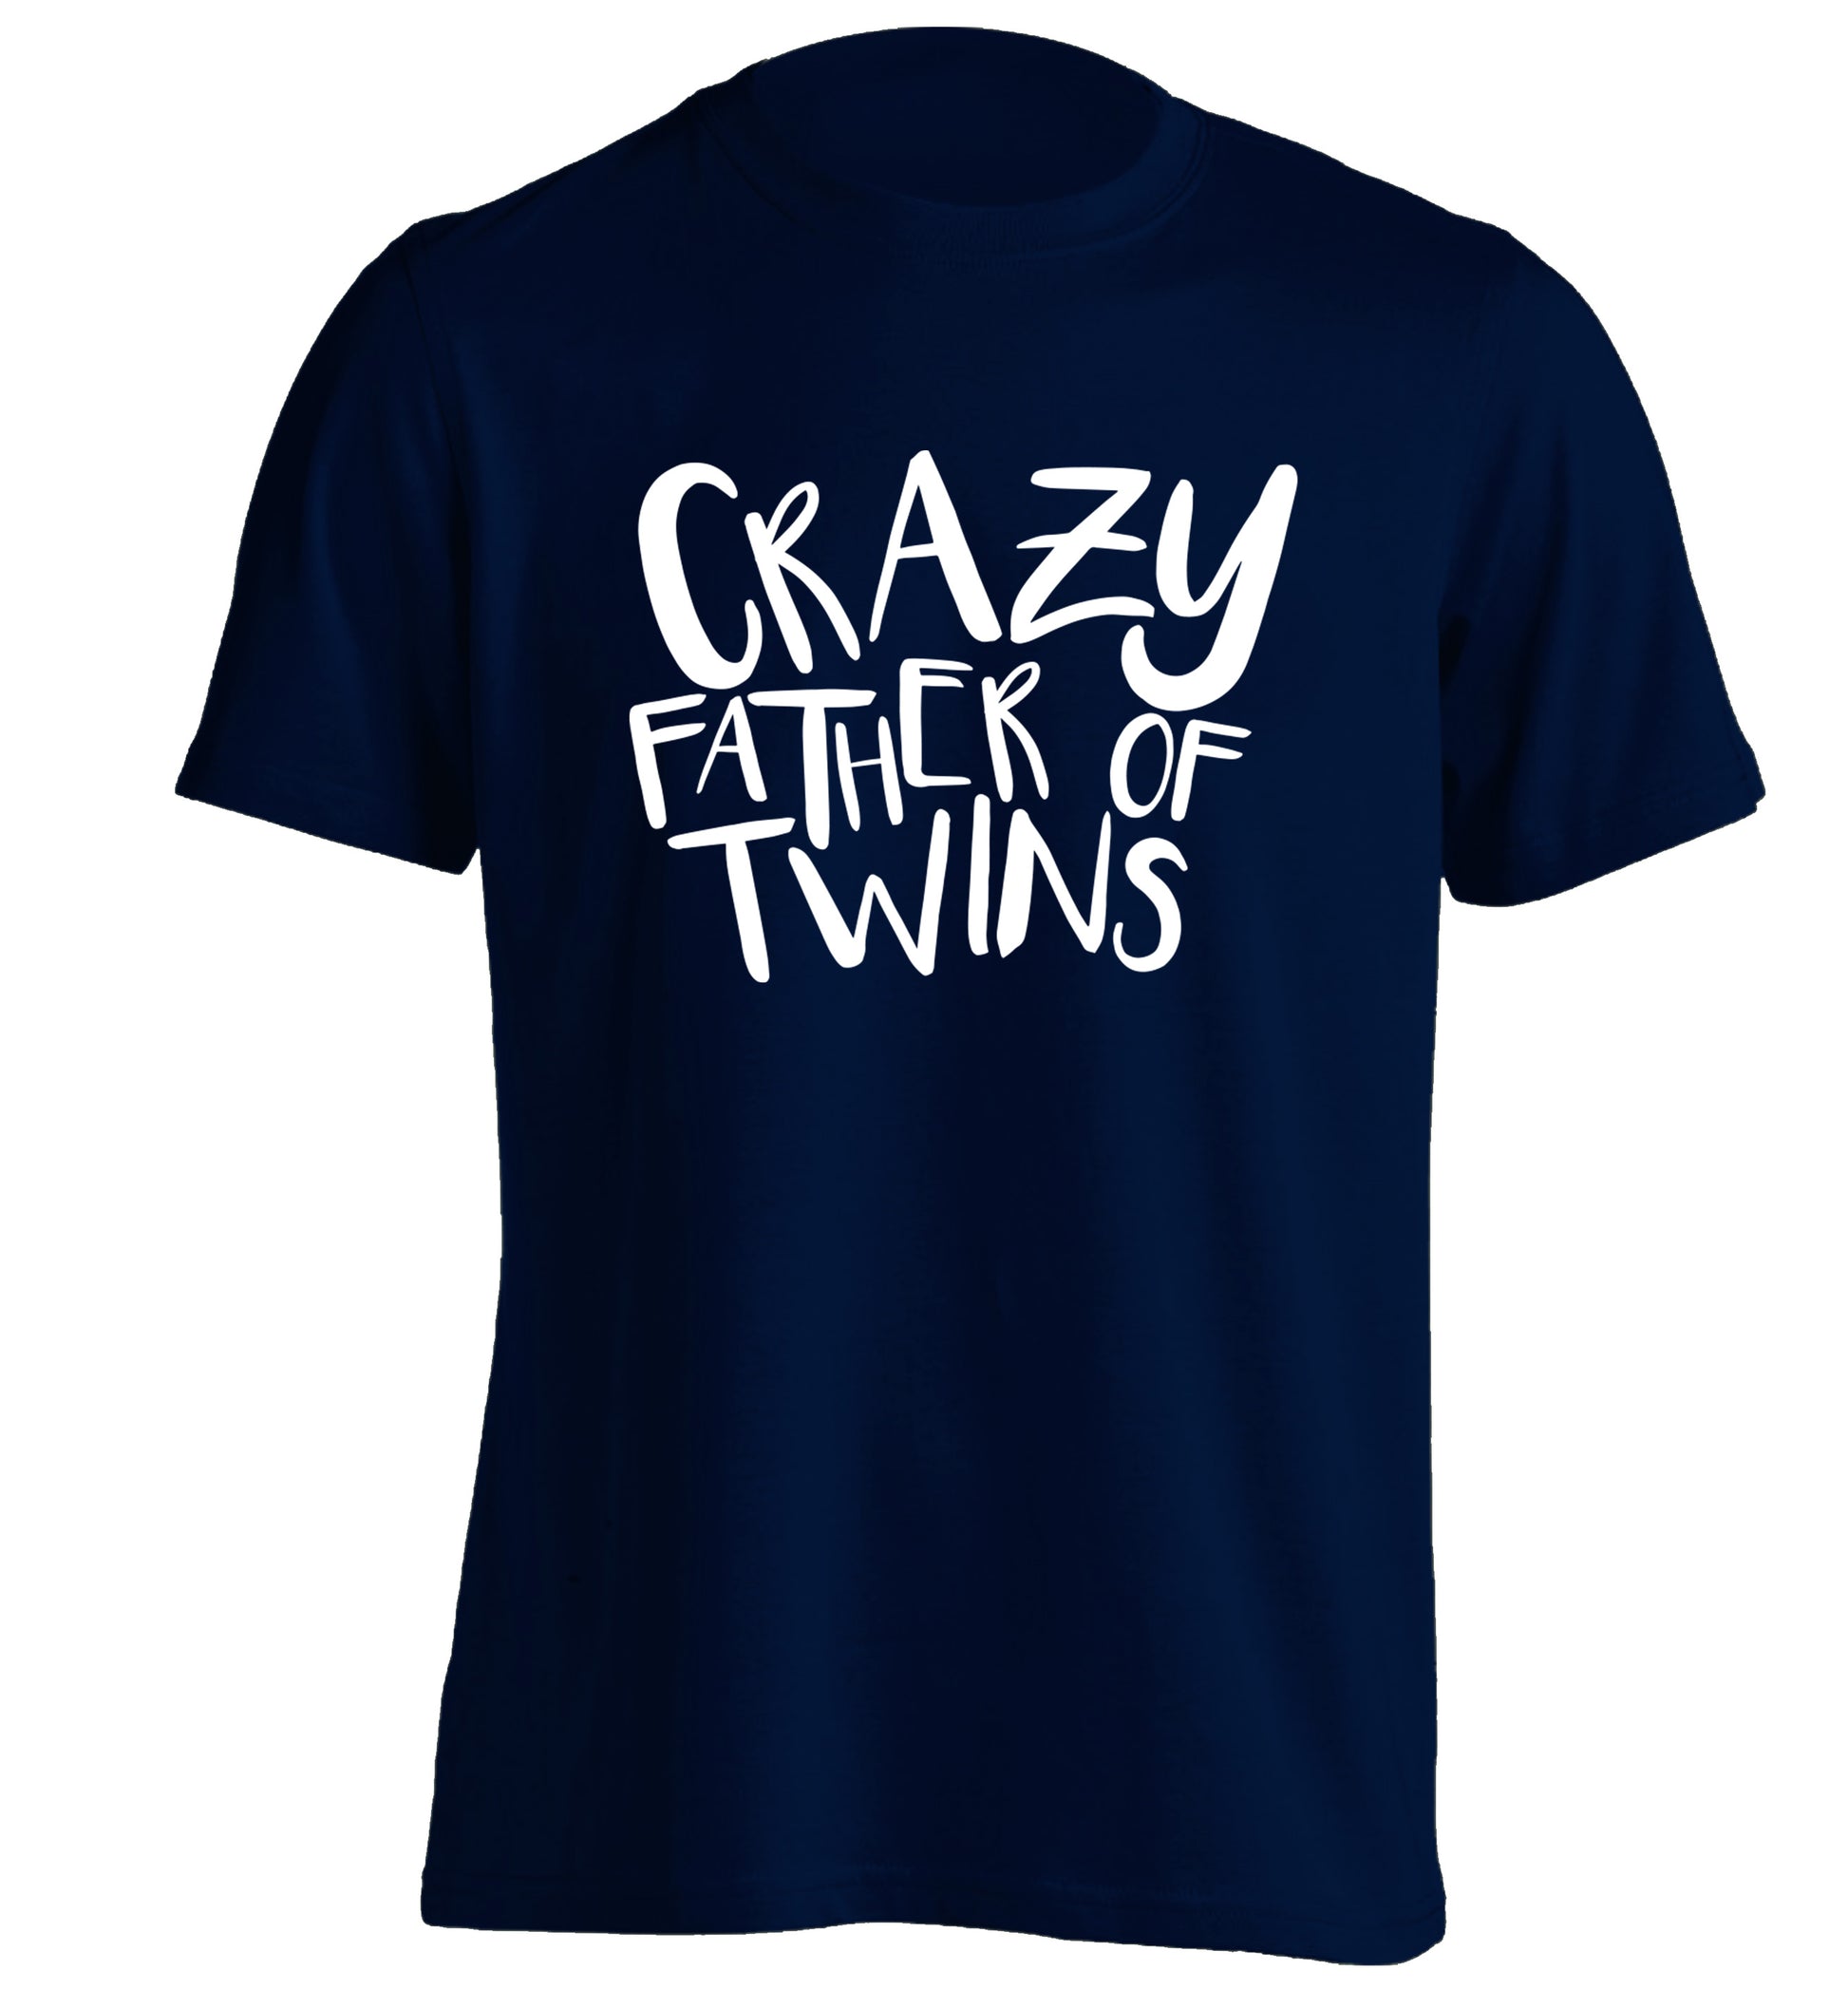 Crazy father of twins adults unisex navy Tshirt 2XL